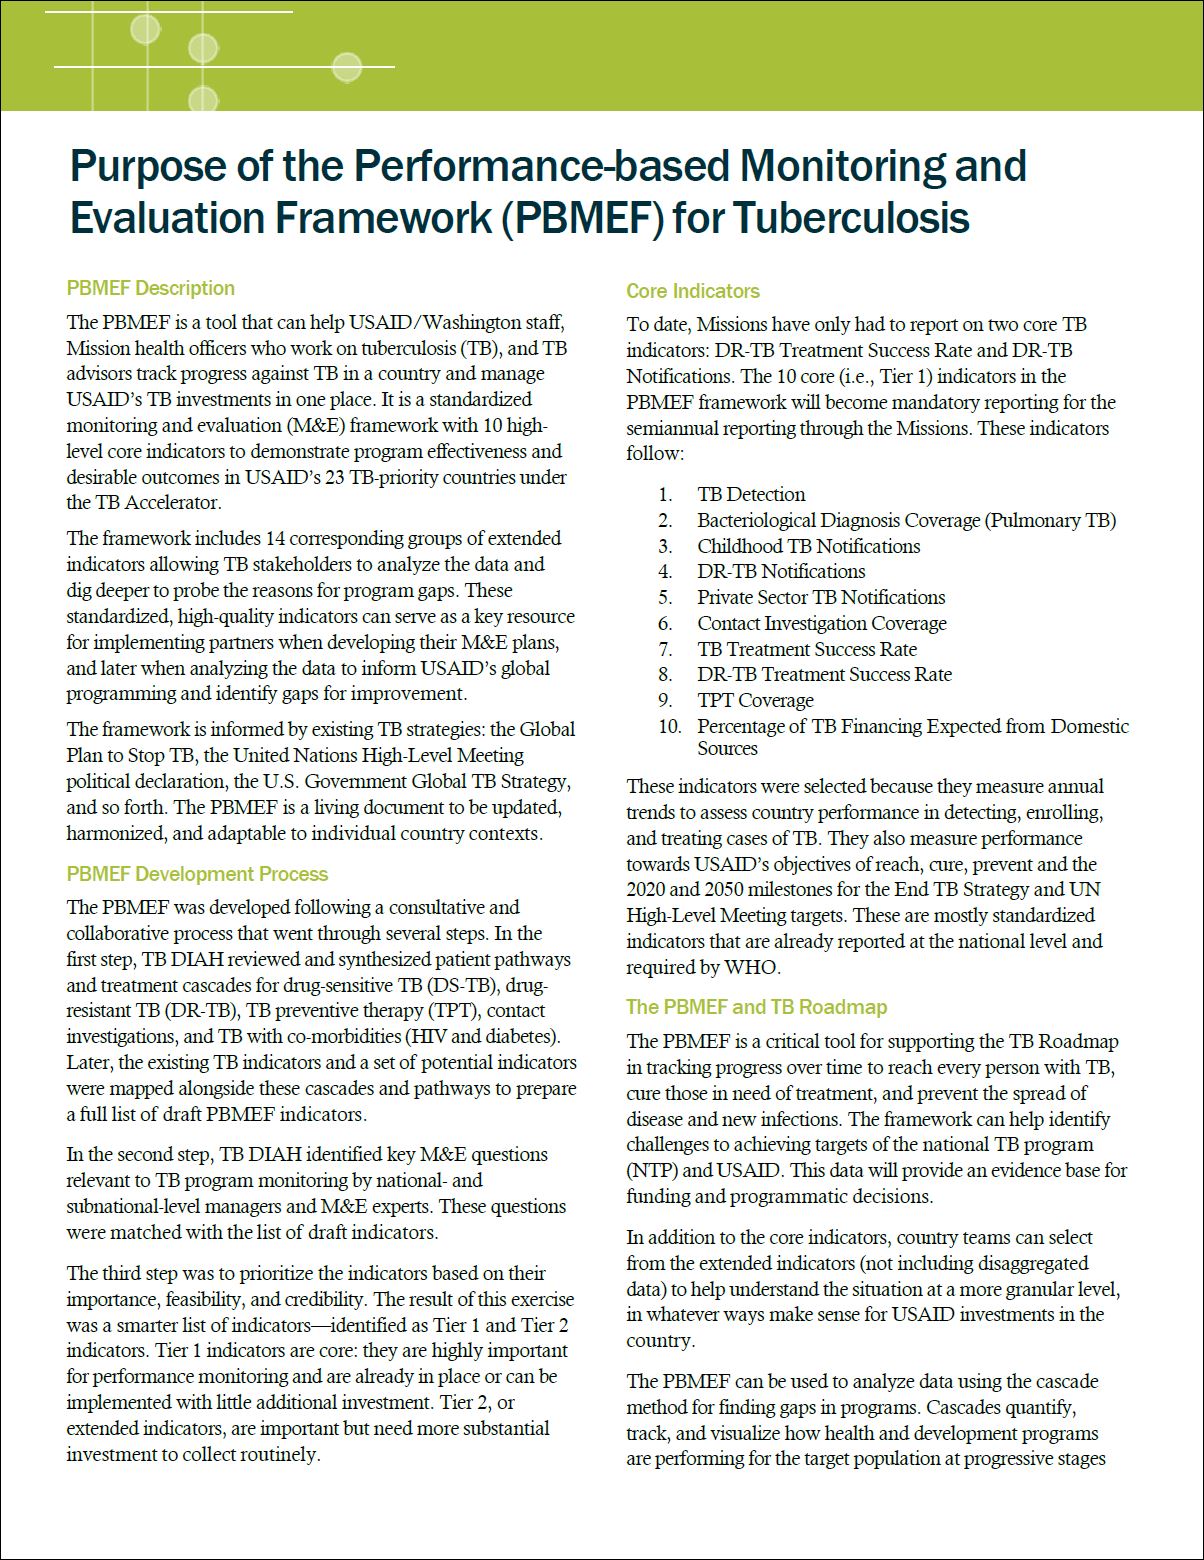 Purpose of the Performance-based Monitoring and Evaluation Framework (PBMEF) for Tuberculosis